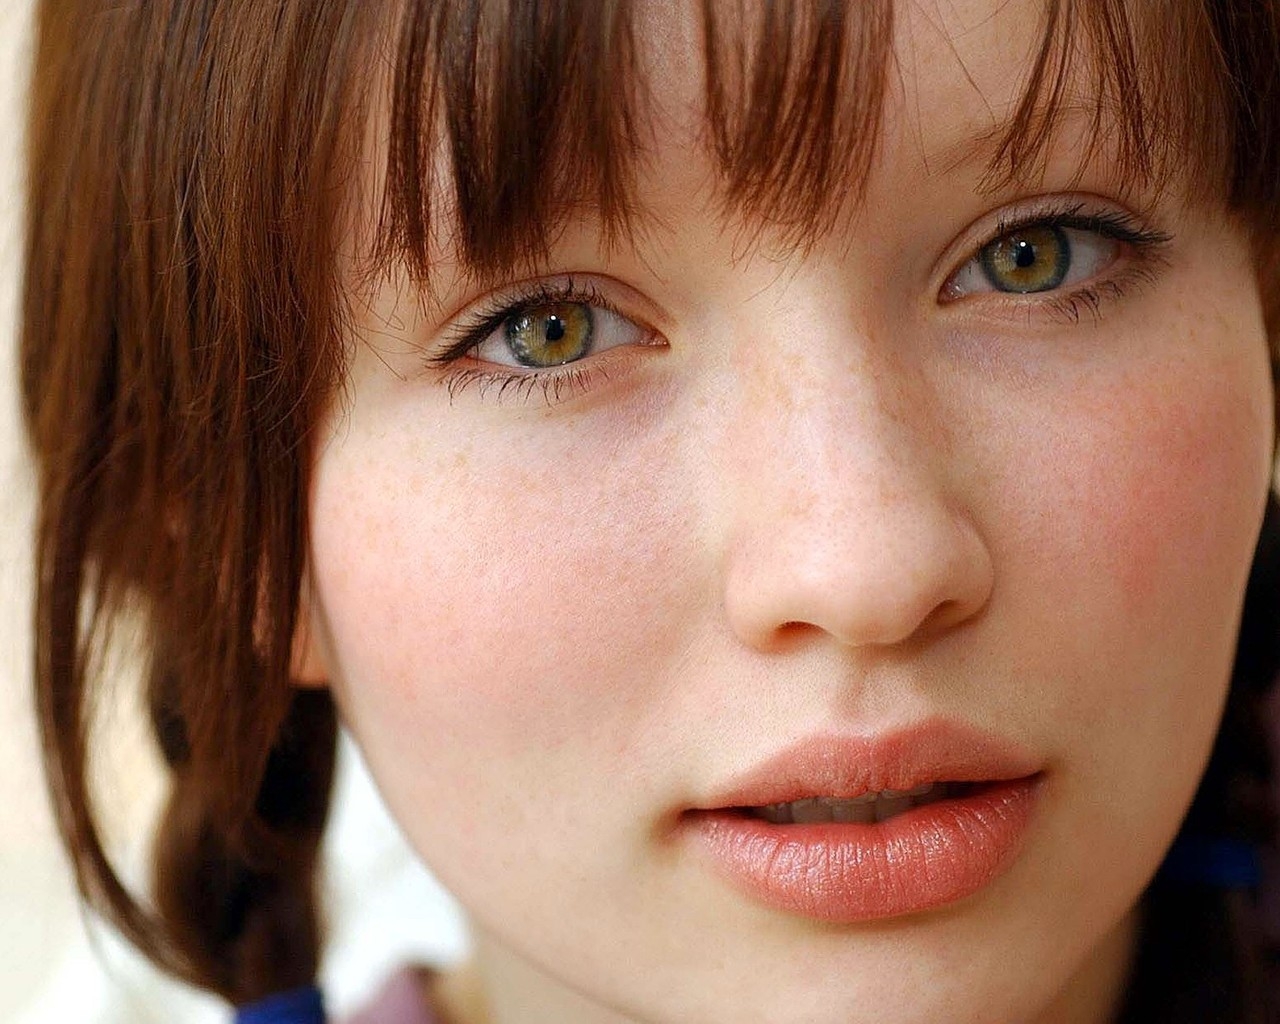 Emily Browning for 1280 x 1024 resolution